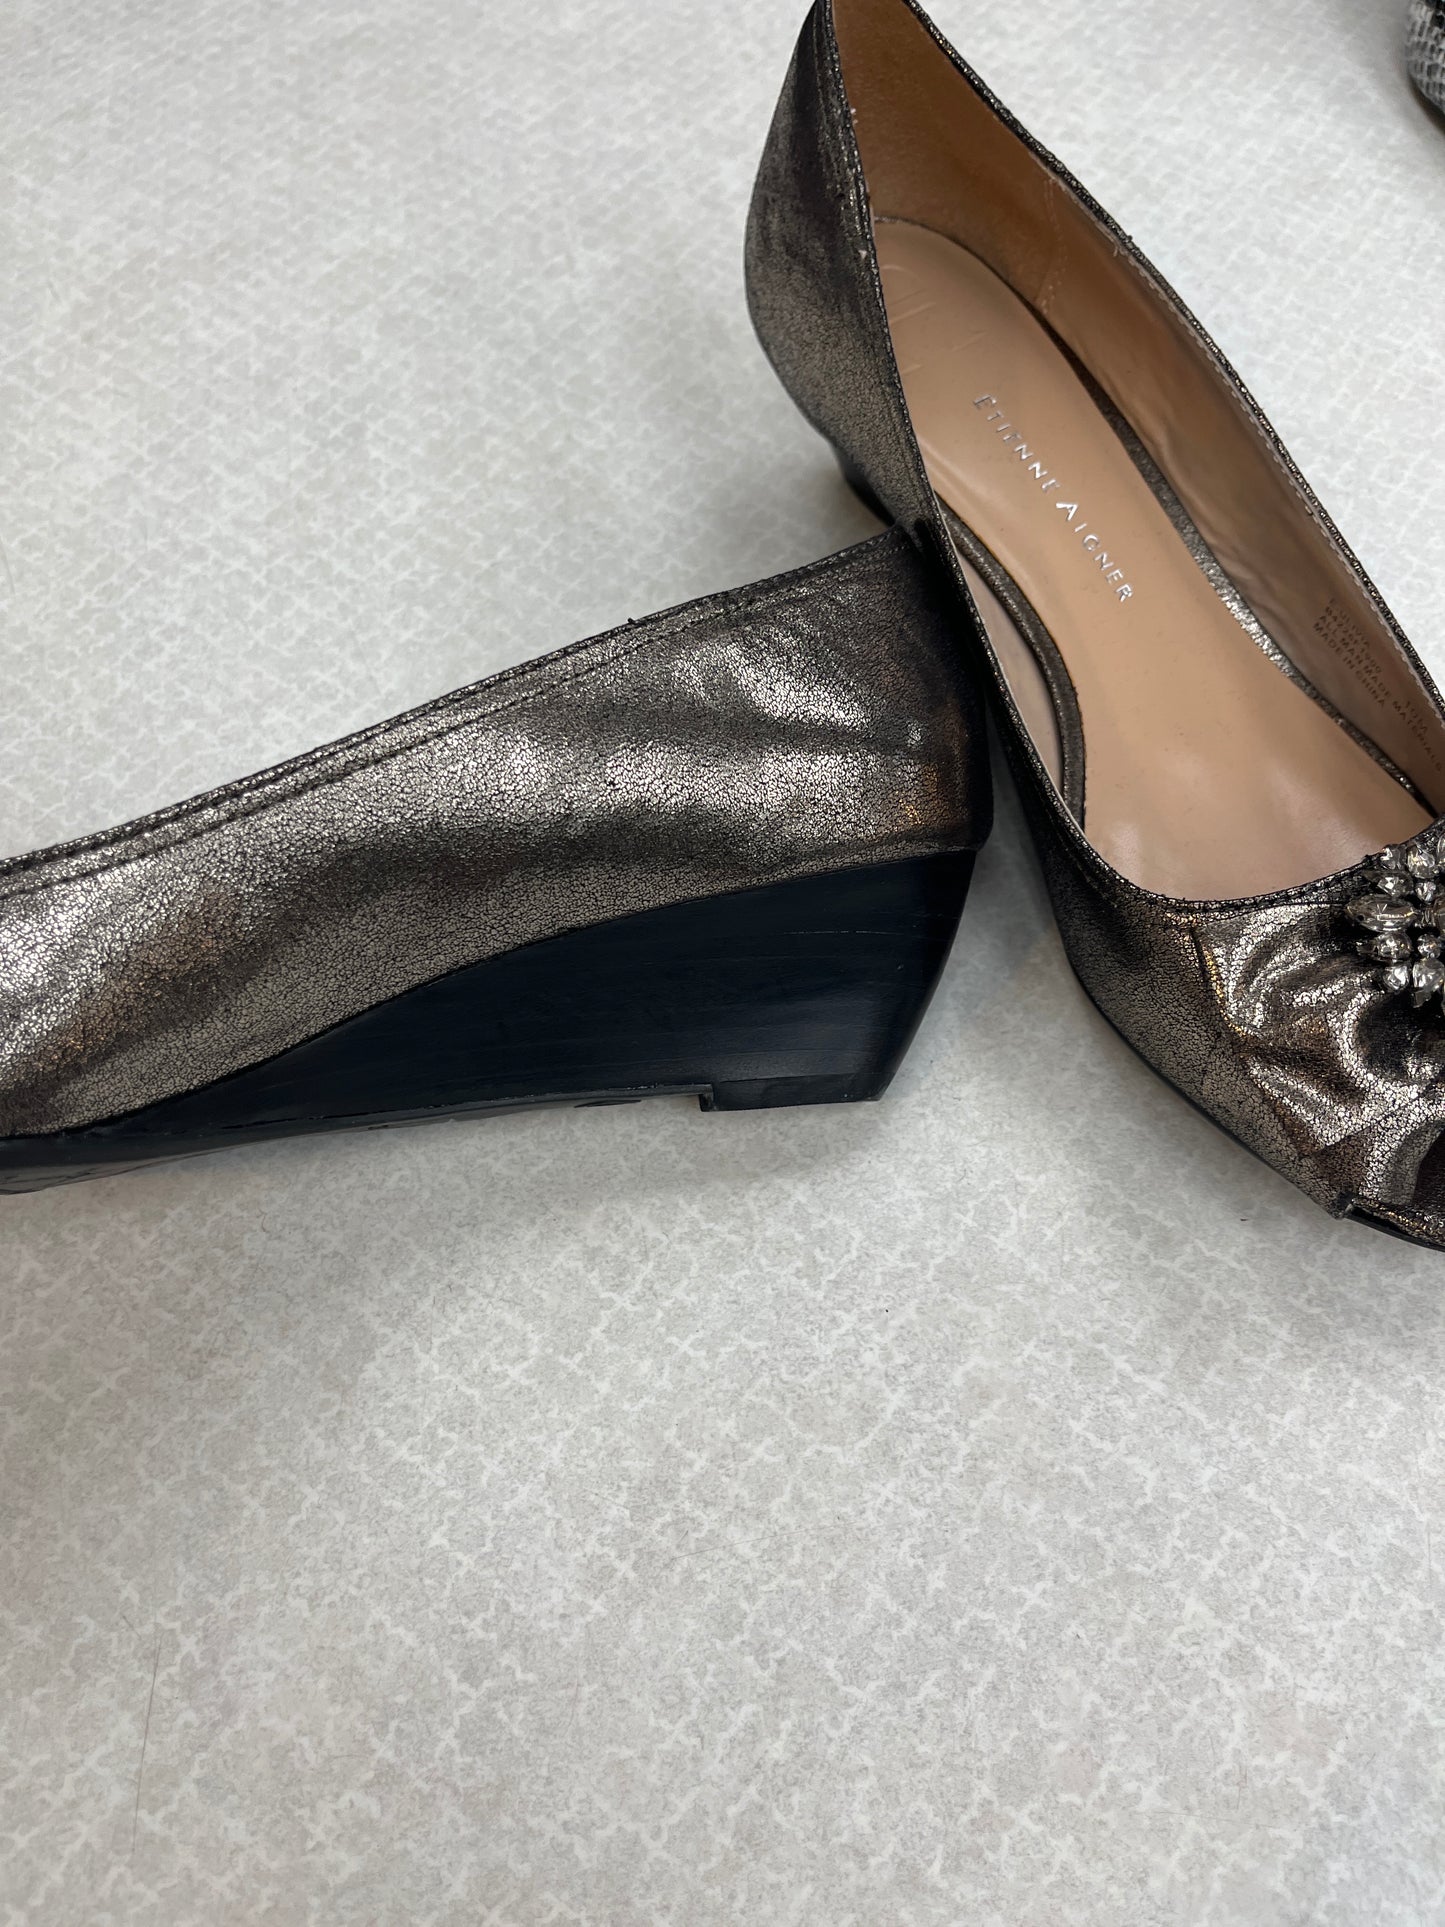 Shoes Heels Wedge By Etienne Aigner  Size: 10